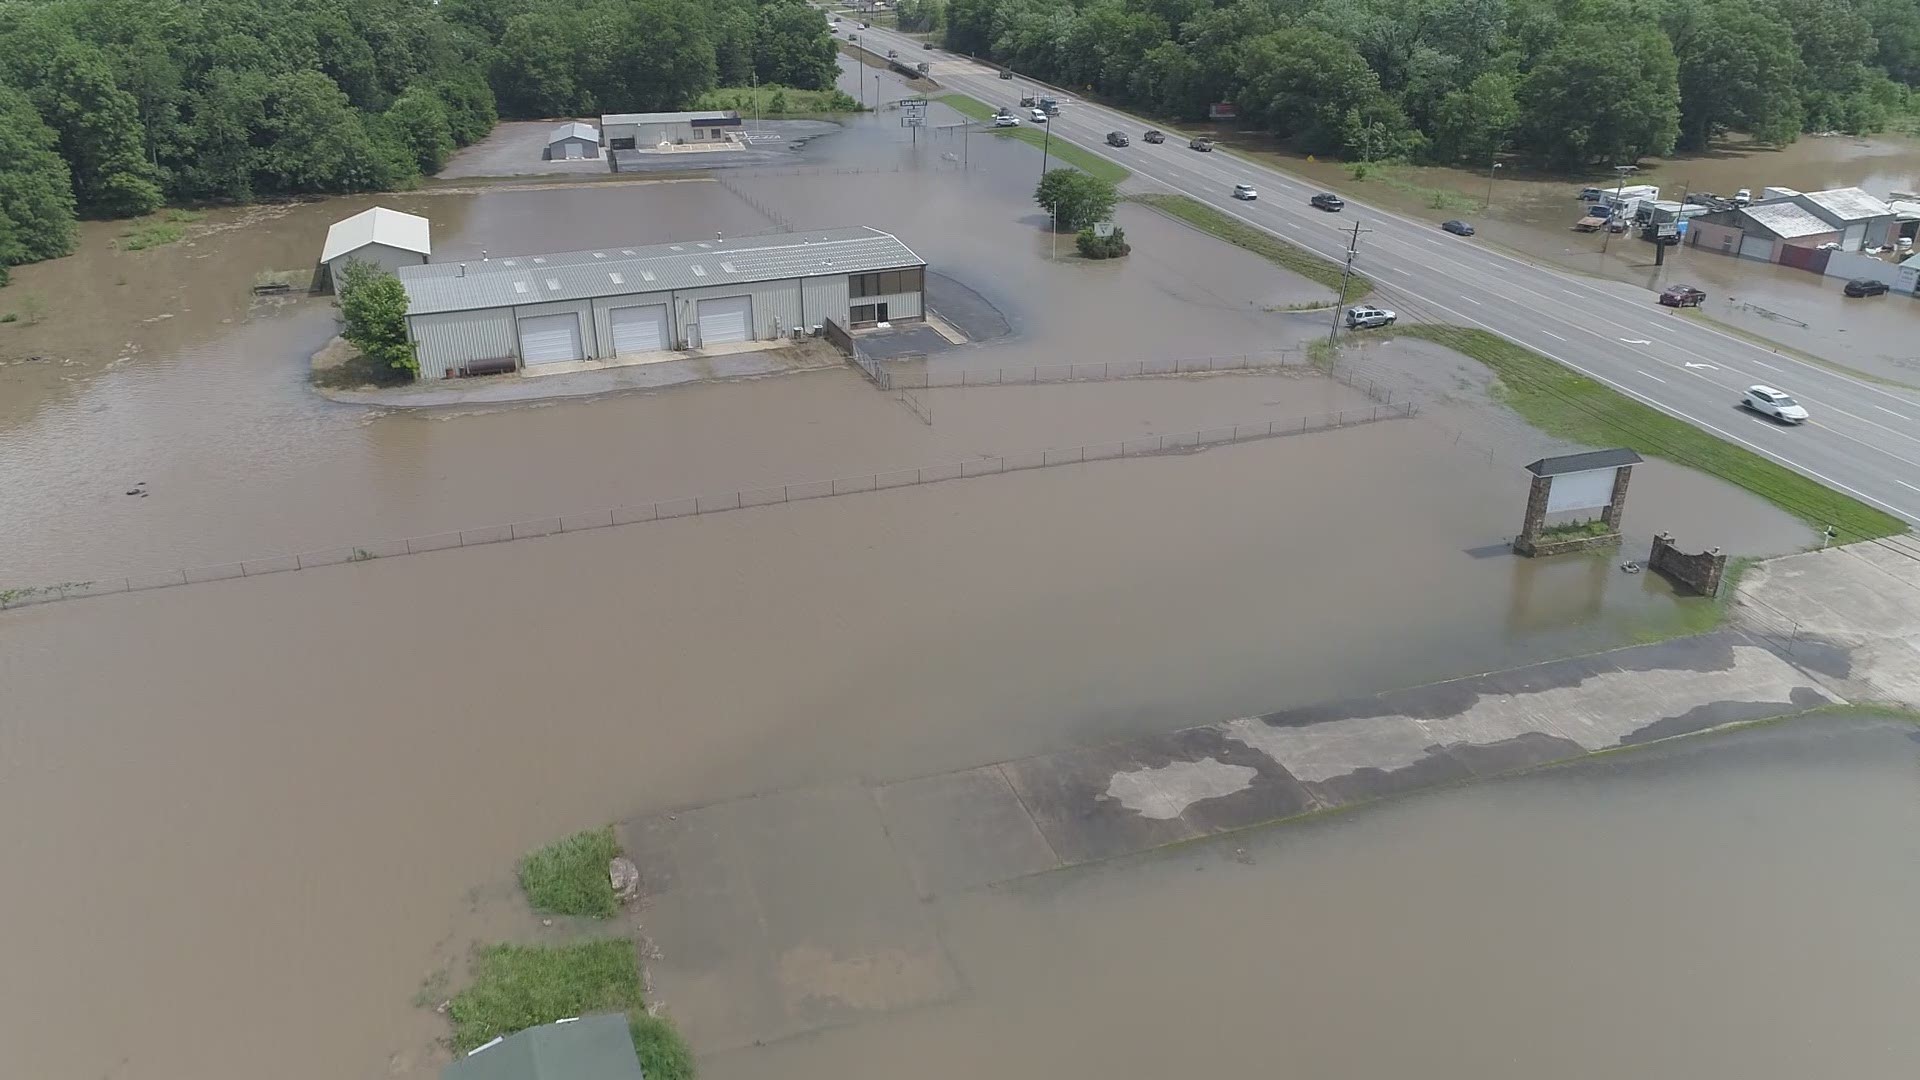 This drone footage captured flooding off Highway 7 near Russellville by Whig Creek. Remember to stay safe while driving near flooded areas.